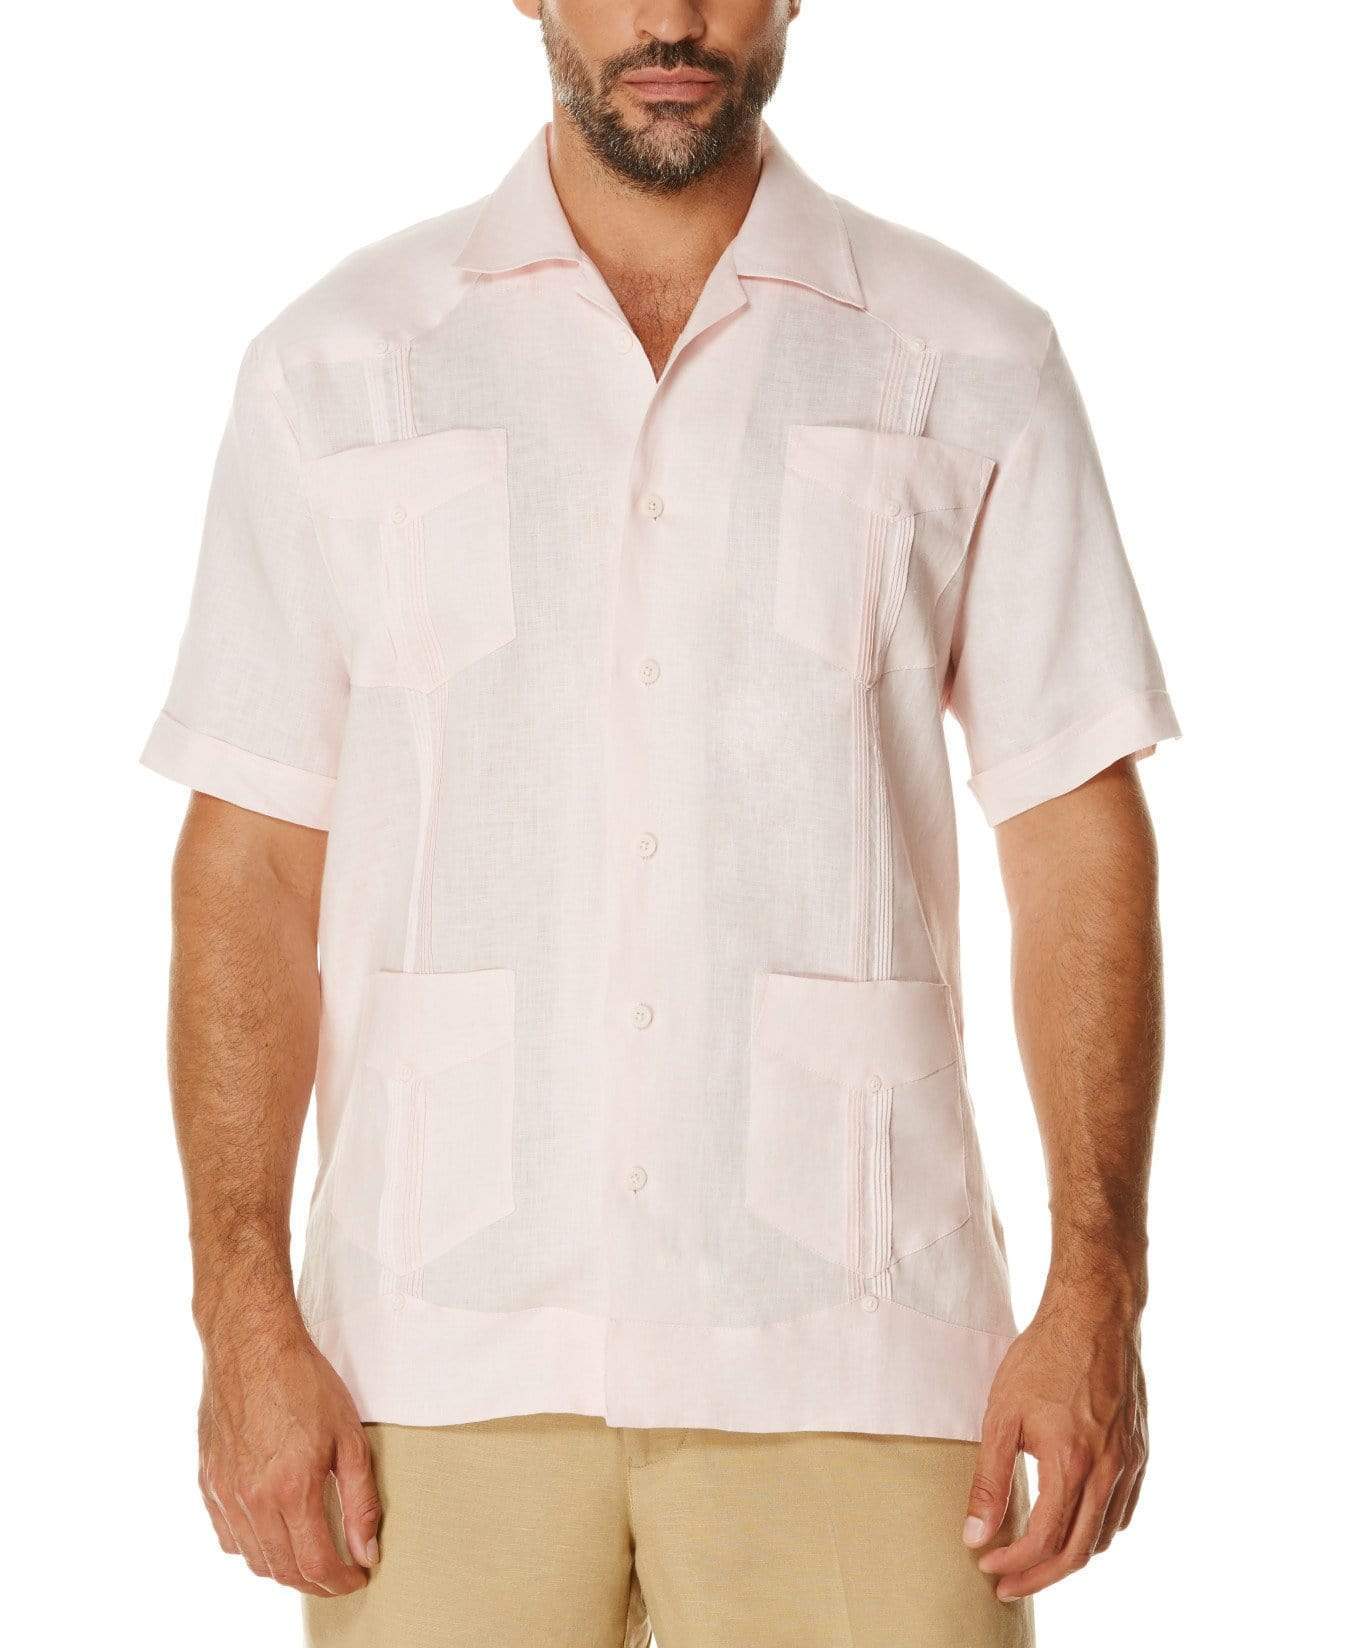 Total 93+ imagen guayabera rosa outfit - Abzlocal.mx